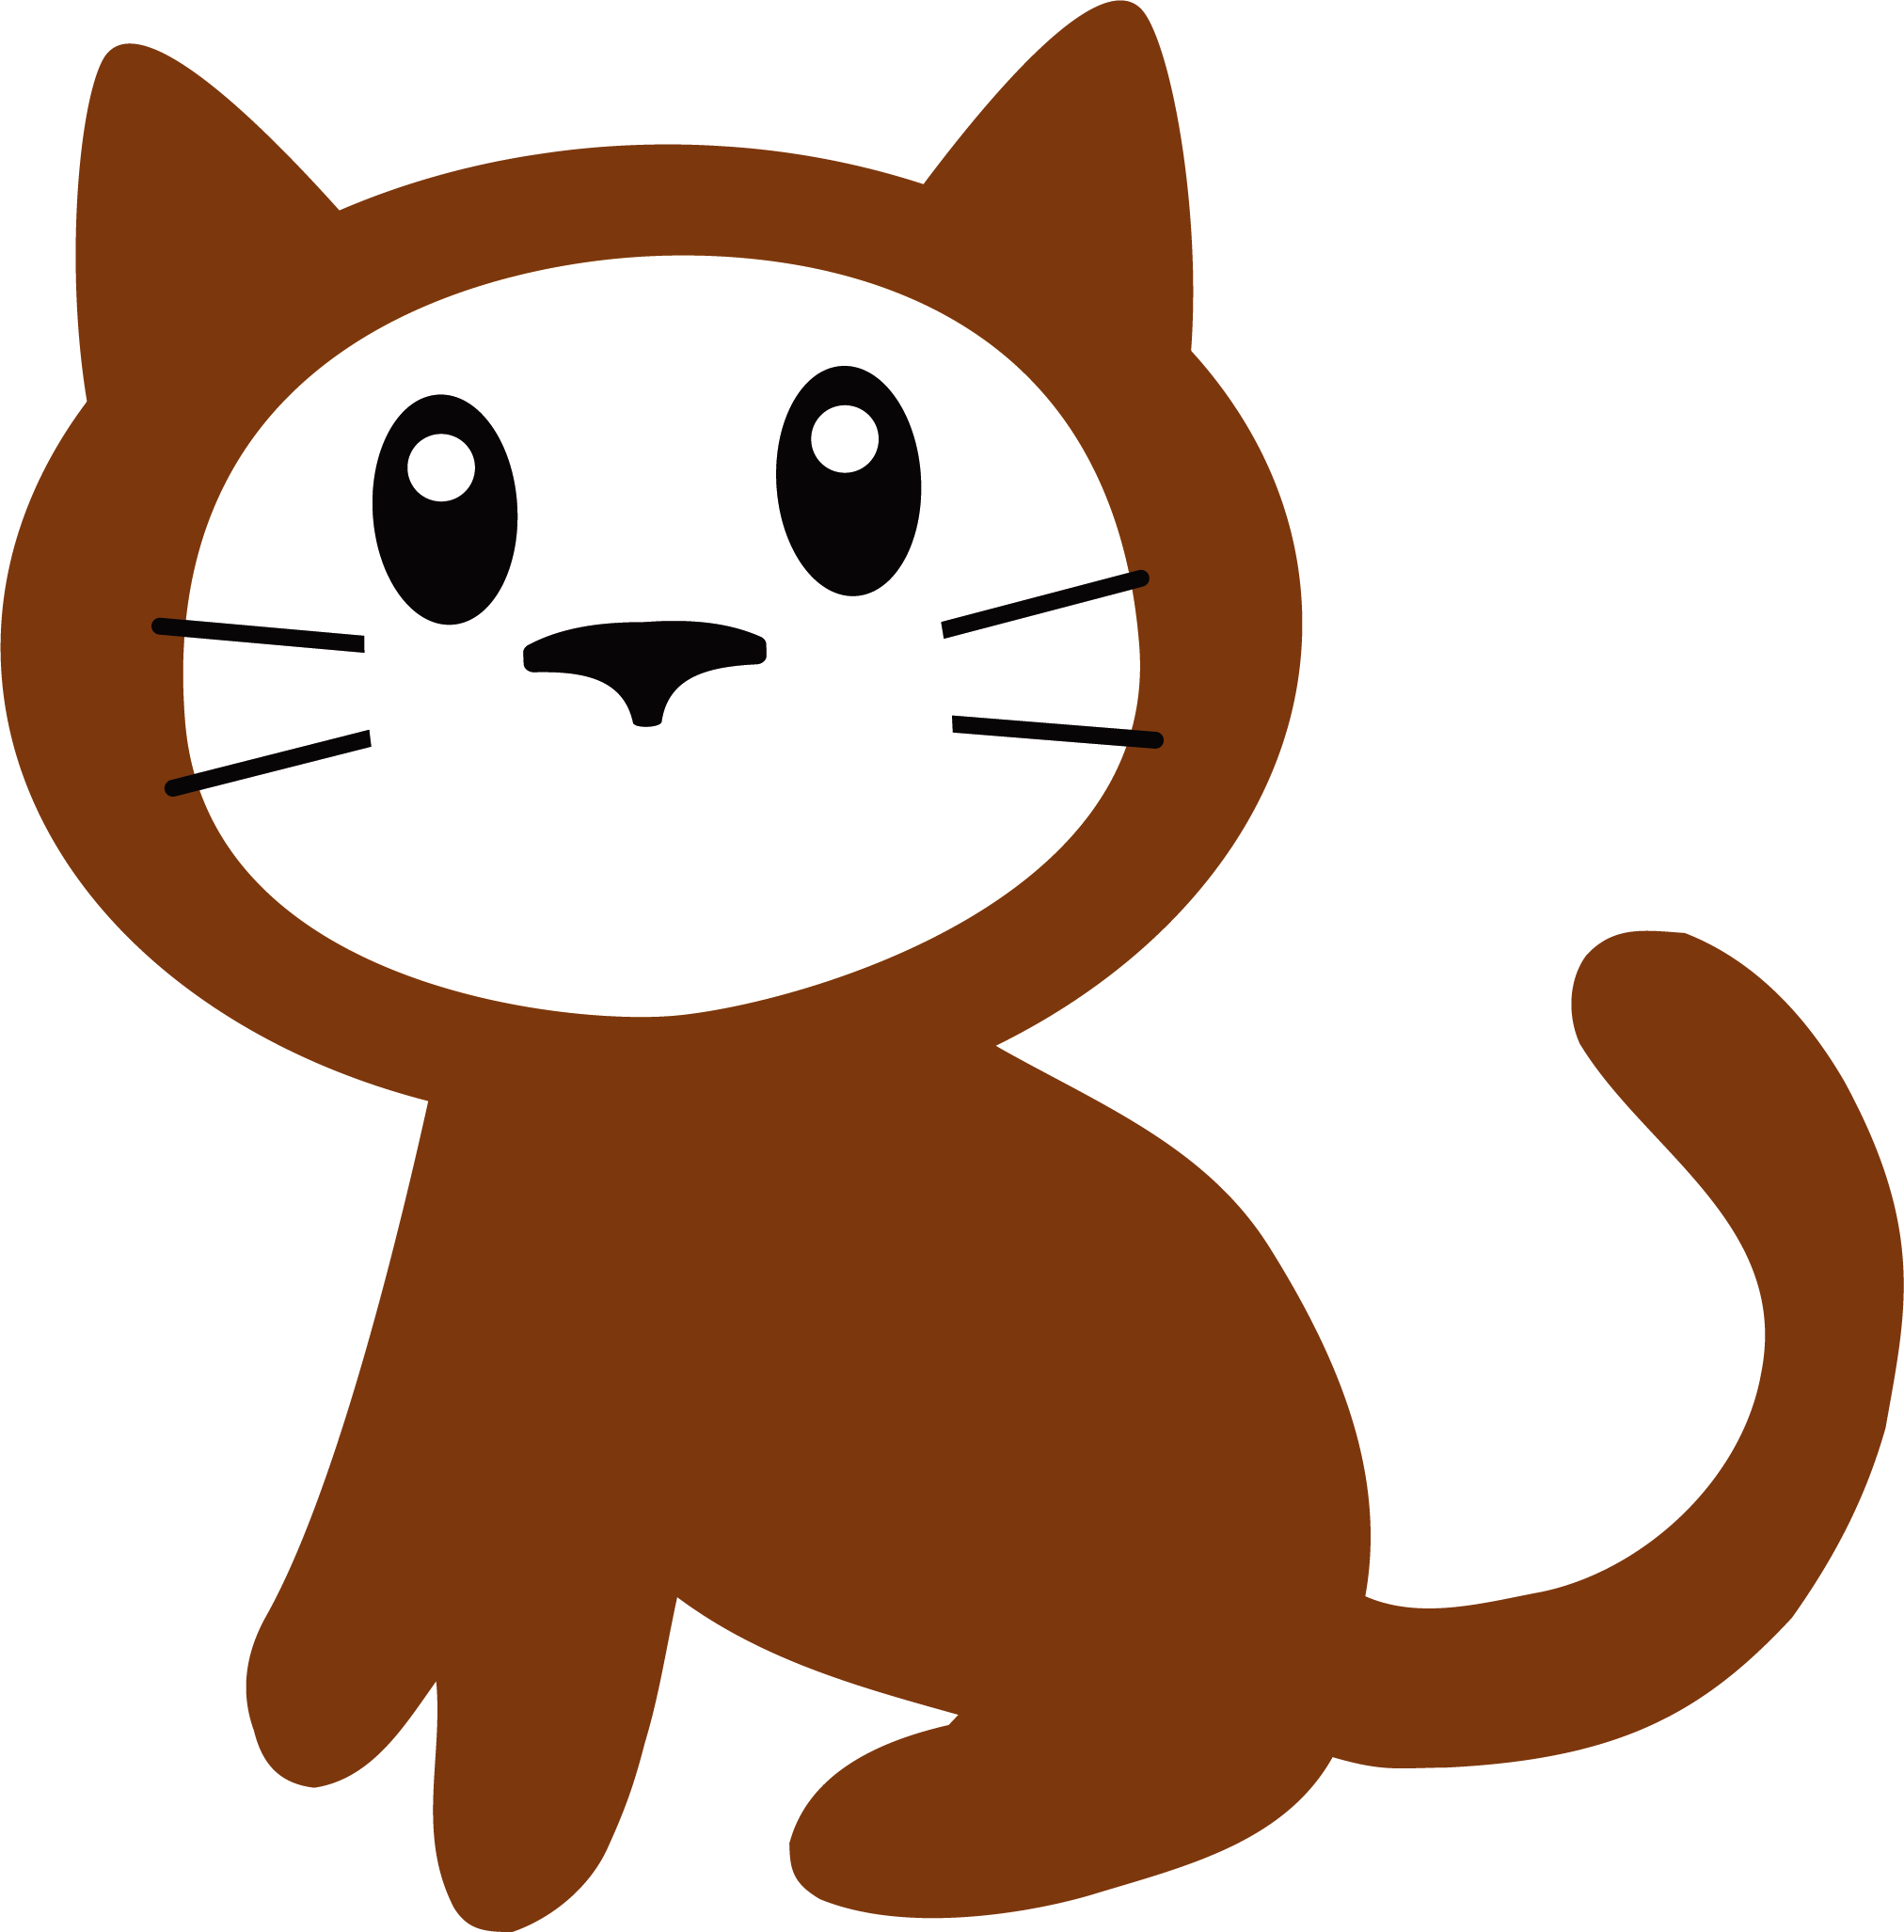 And dog at getdrawings. Clipart skull cat